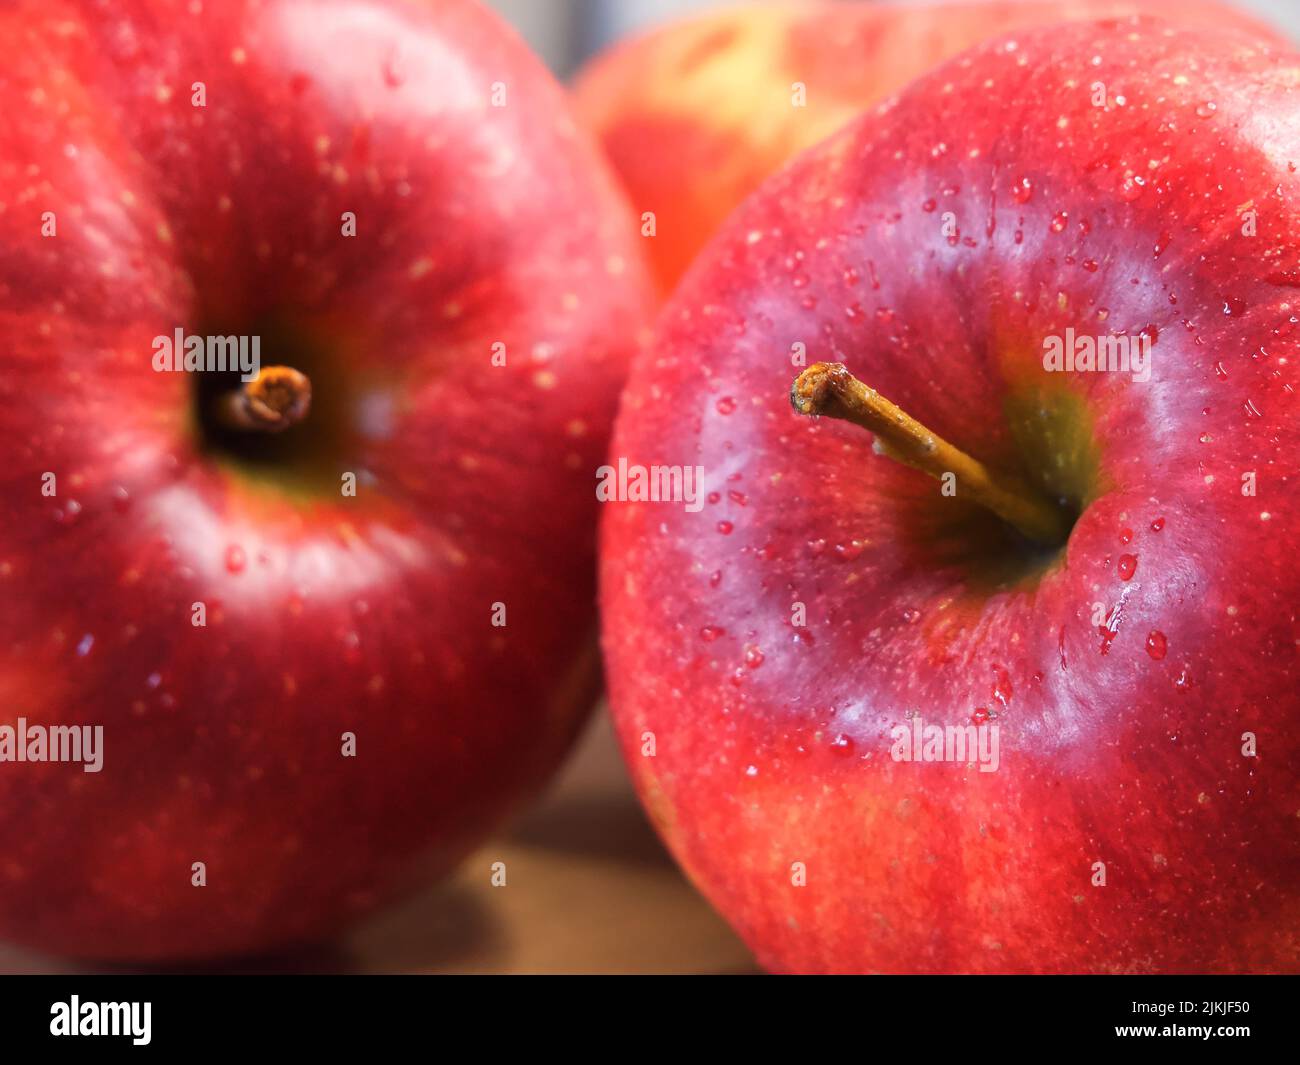 Delicious red apples photographed in macro. Ripe fruit. Stock Photo